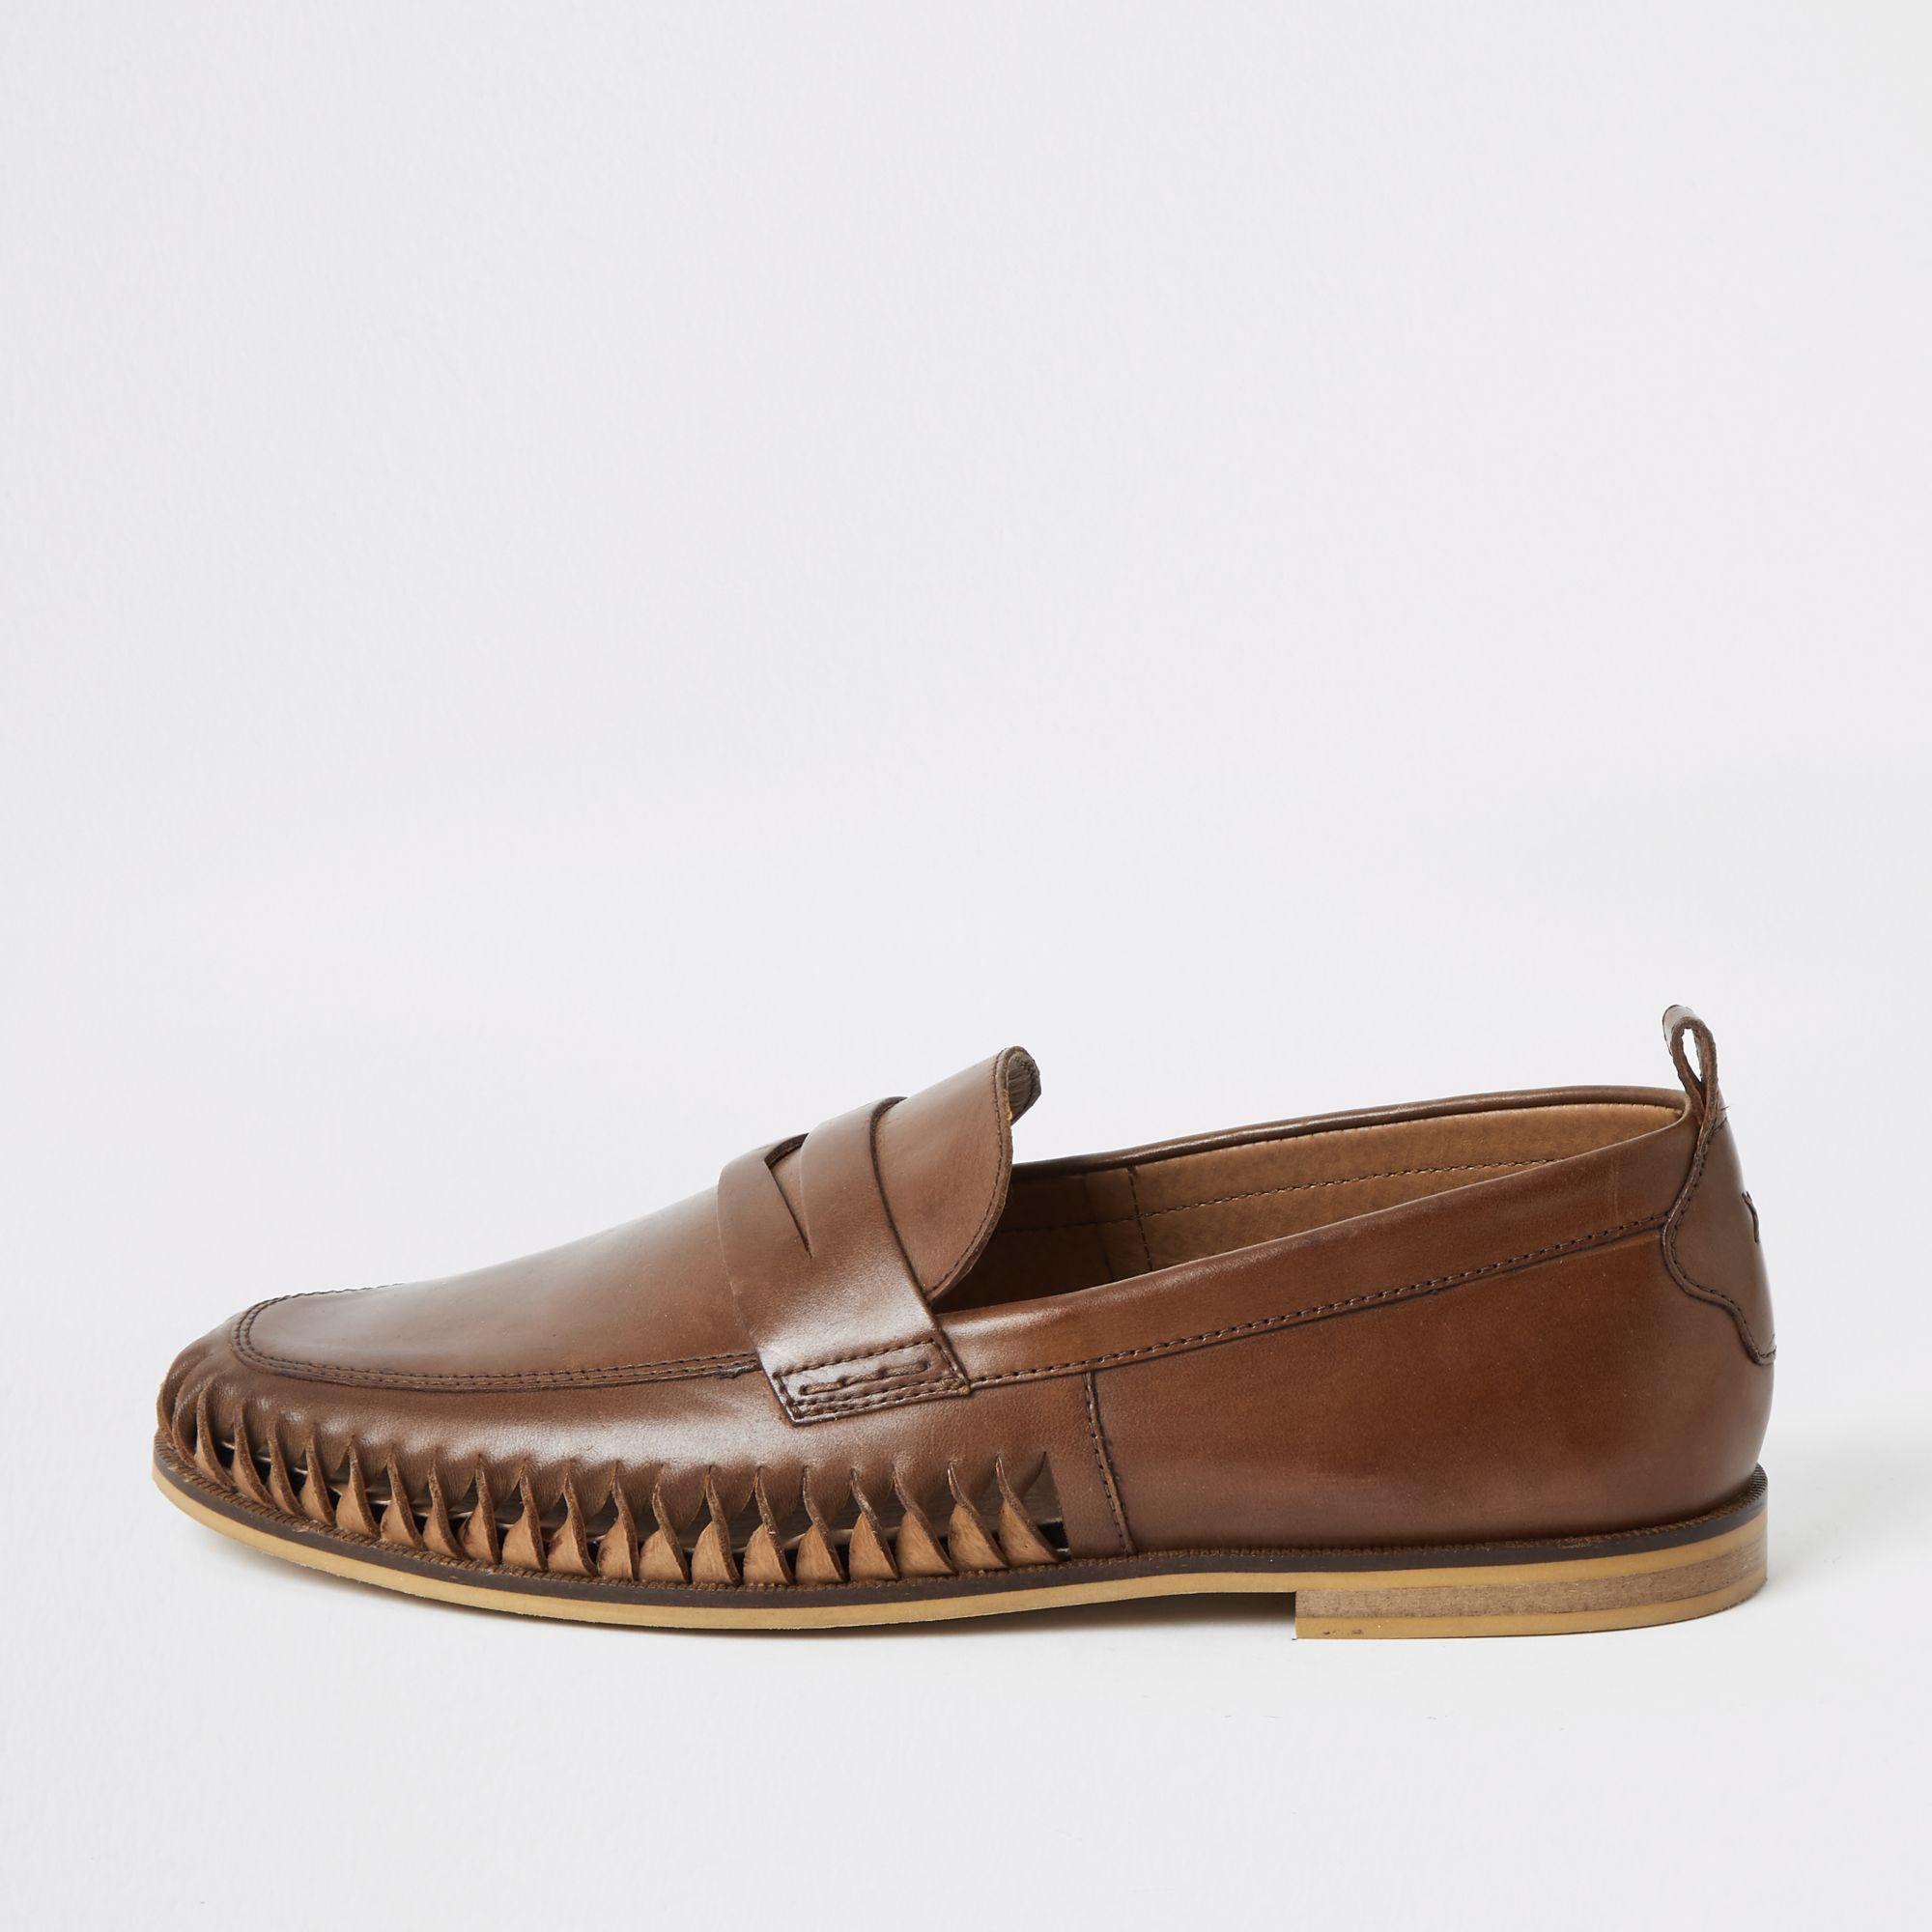 River Island Brown Leather Woven Loafers for Men - Lyst